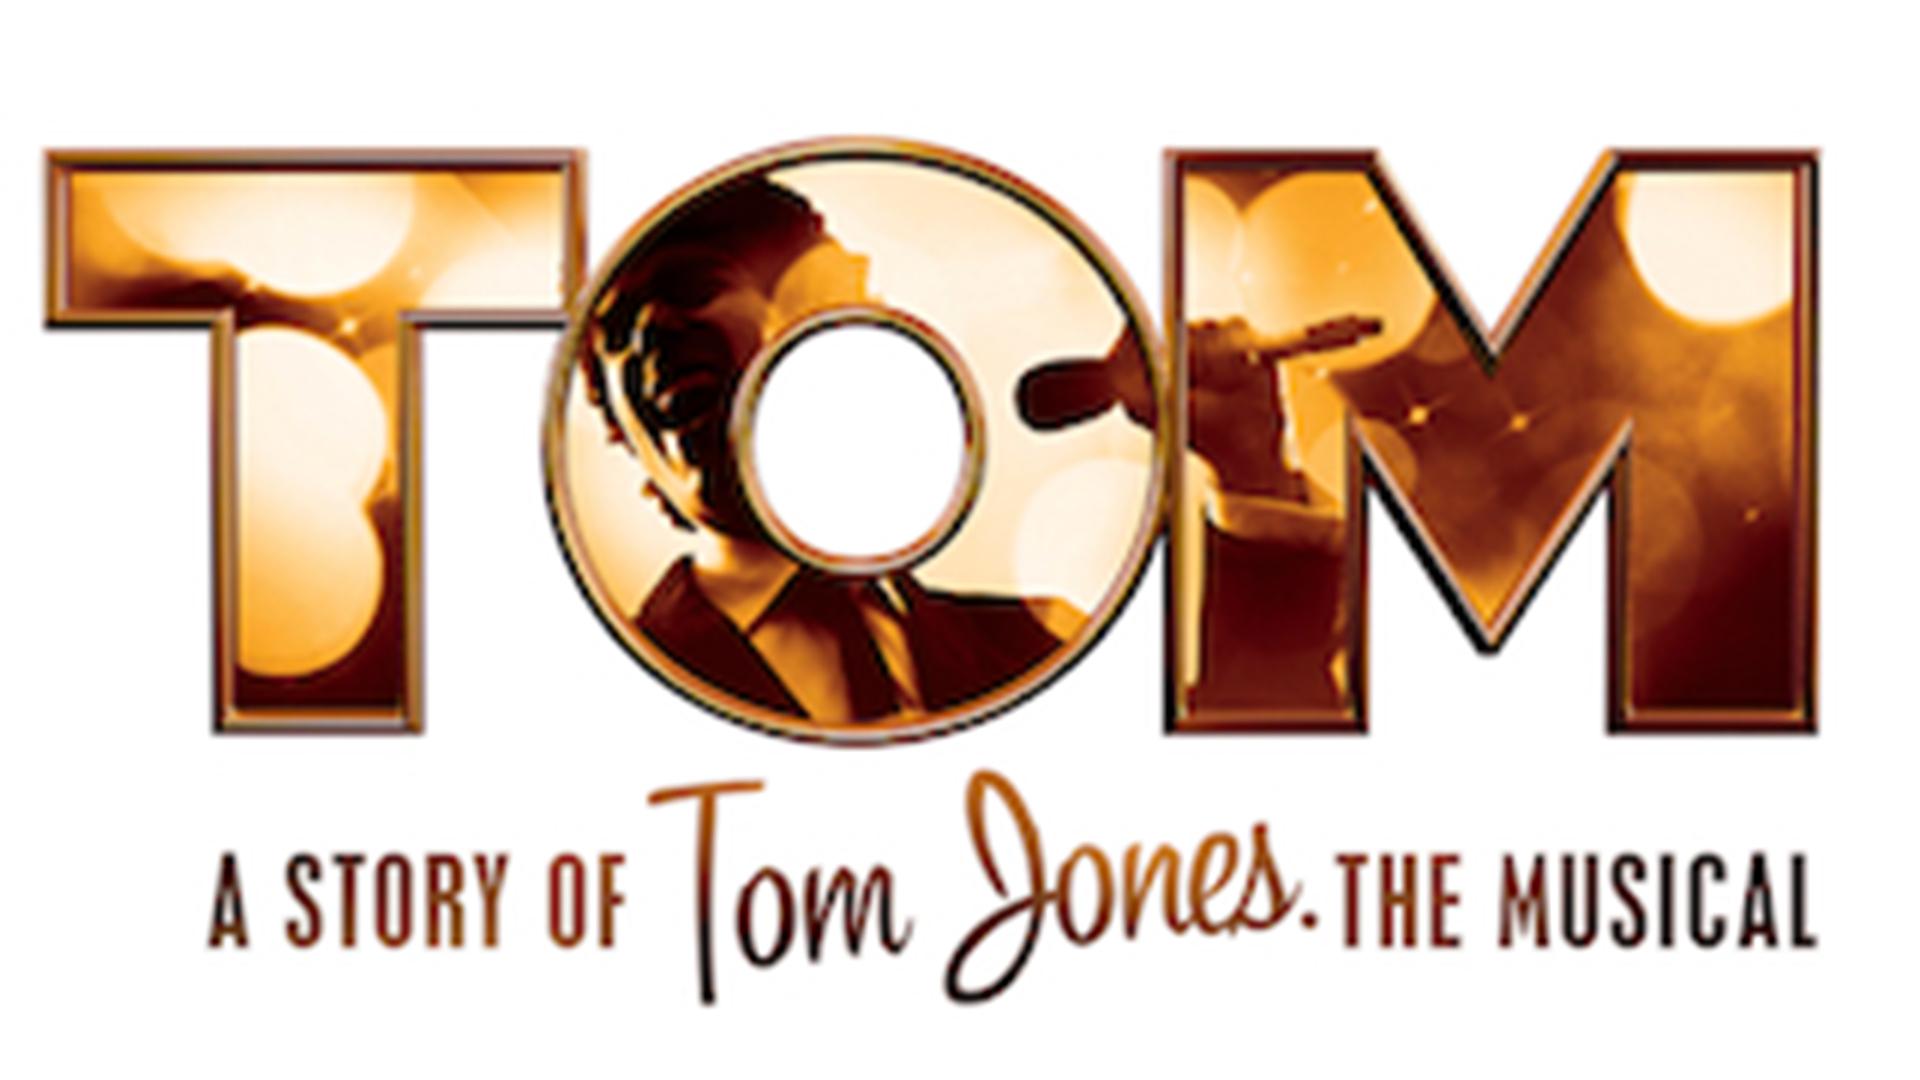 TOM in big letters with a male singer holding a microphone reflected in it